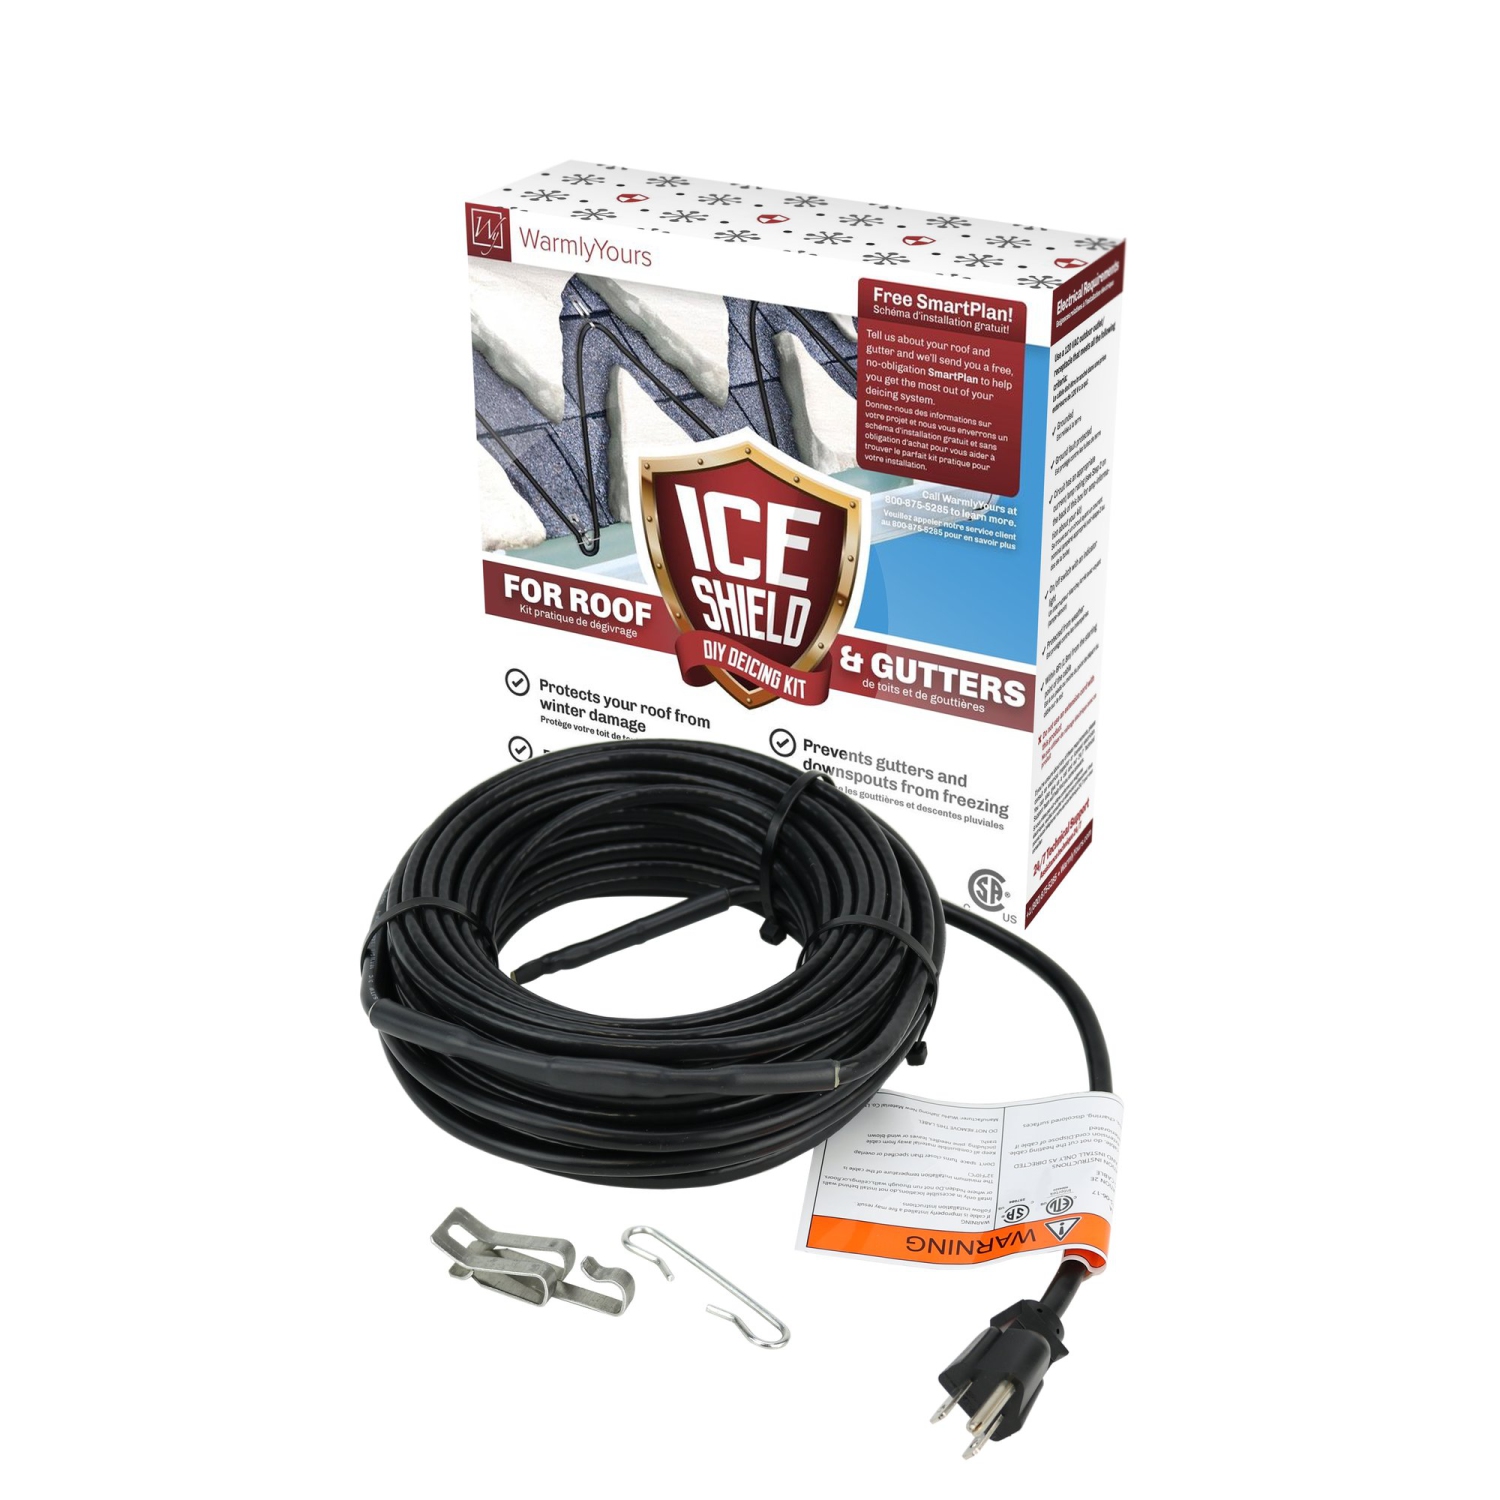 WarmlyYours Ice Shield Roof & Gutter De-icing Cable Kit, 240 ft, Protect from Ice and Snow Damage